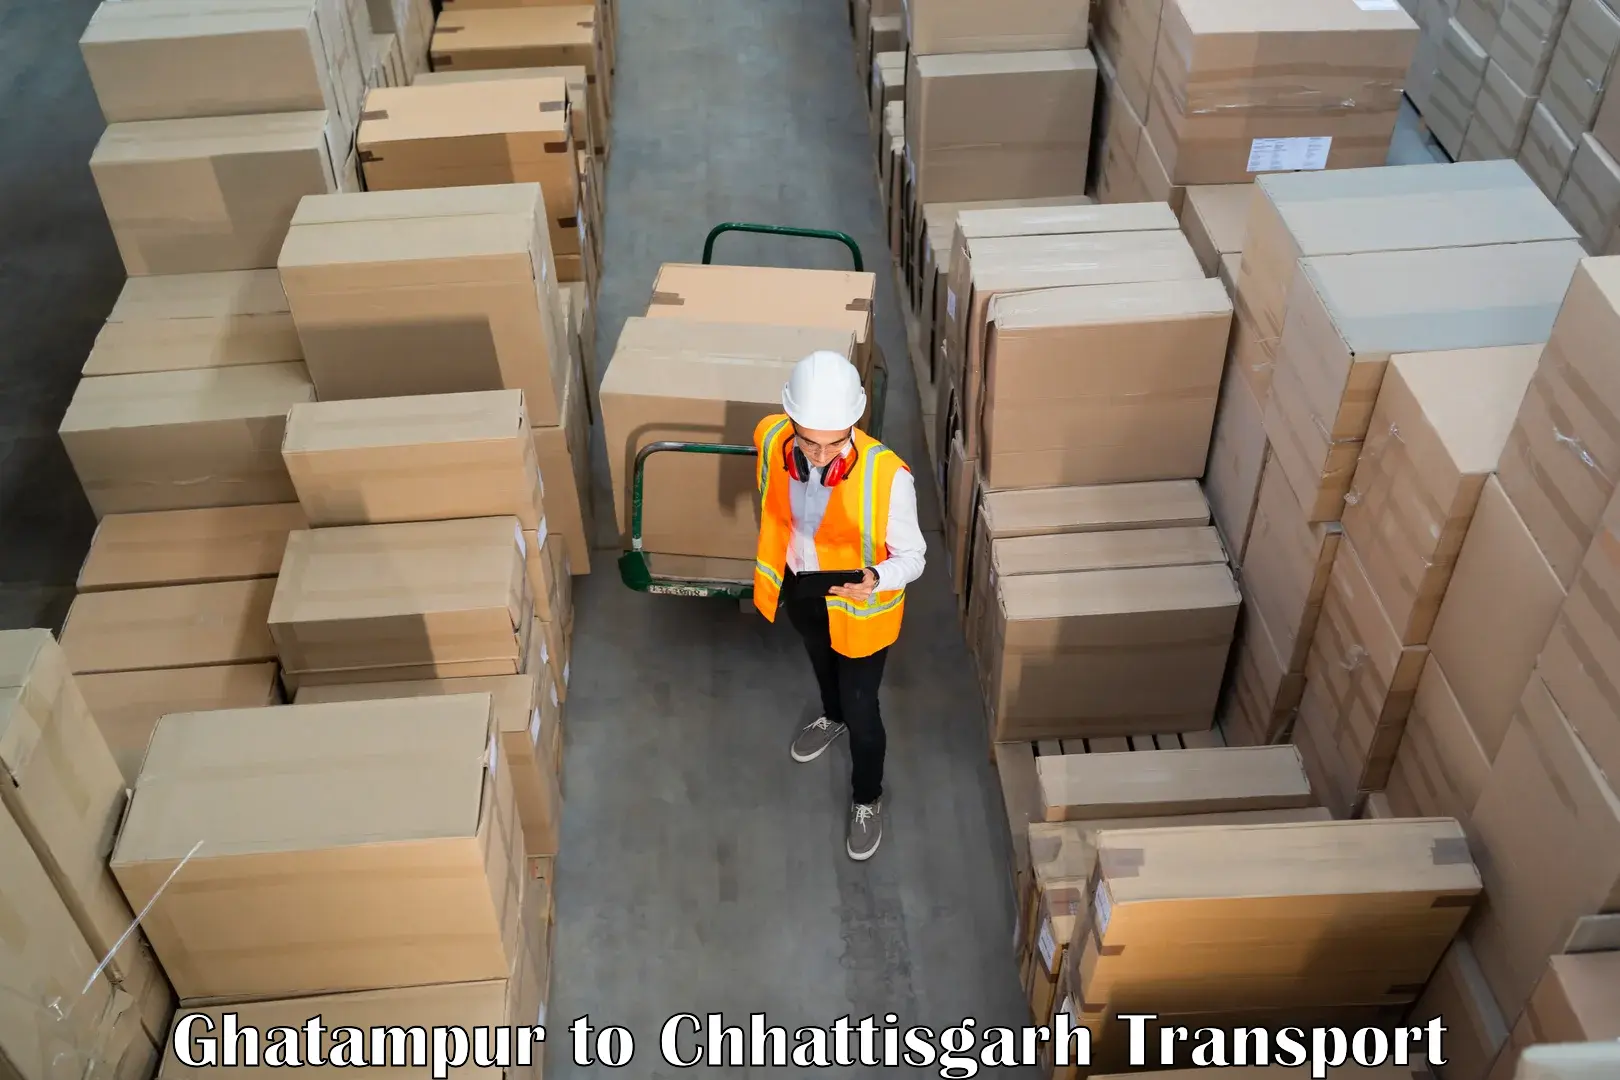 Shipping partner Ghatampur to Pendra